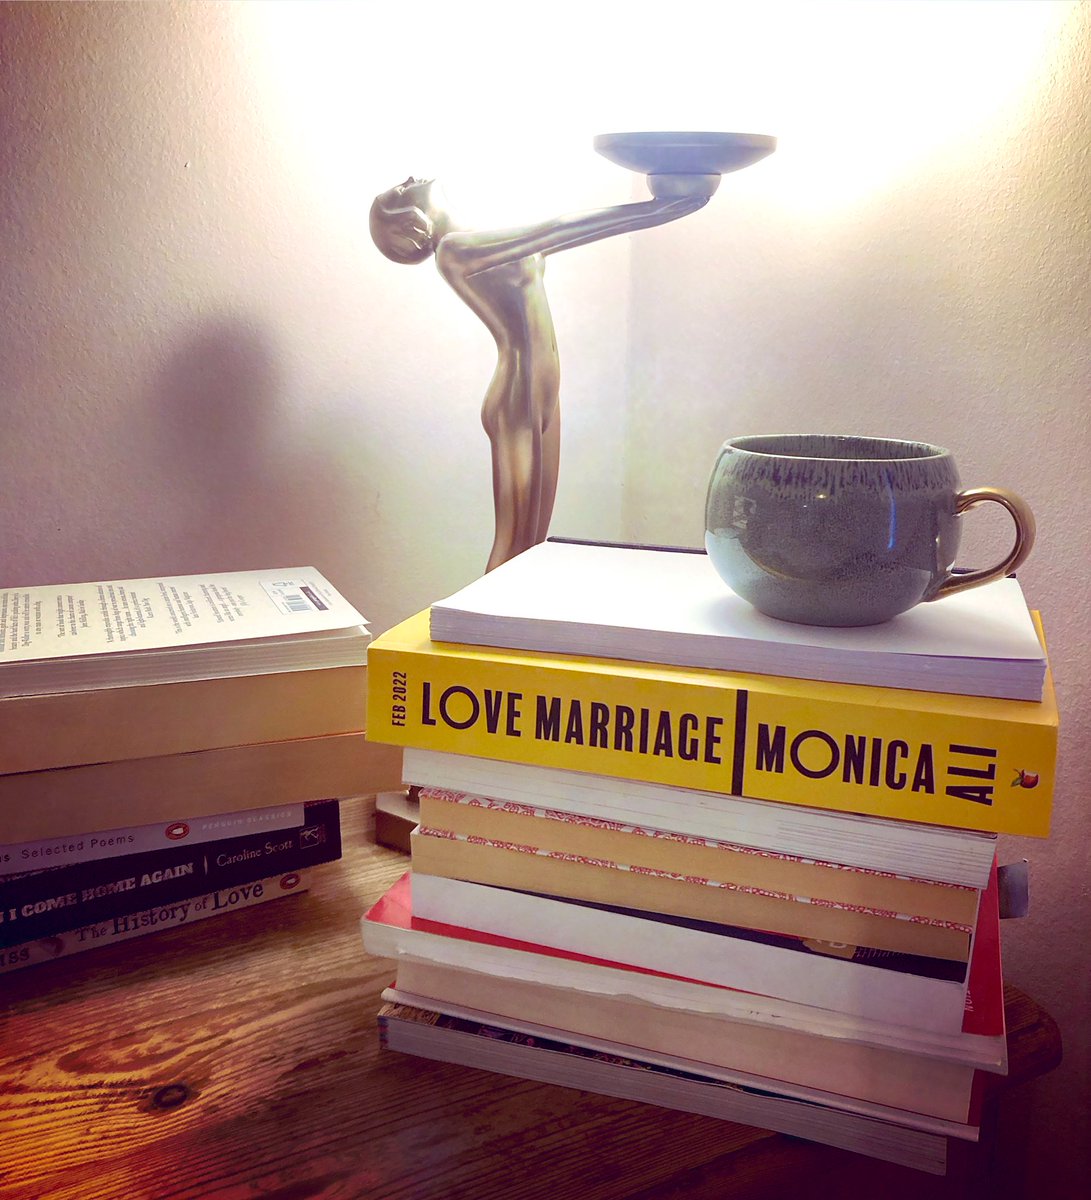 I’ve inhaled pages momentarily, savouring the taste of #MonicaAli’s rich, wry, layered story of two families blending, colliding. Thought-provoking, spiced with conflict, sex, and a huge helping of love. And funny! 
Wishing huge success to #LoveMarriage #MonicaAli  out now. ❤️📚